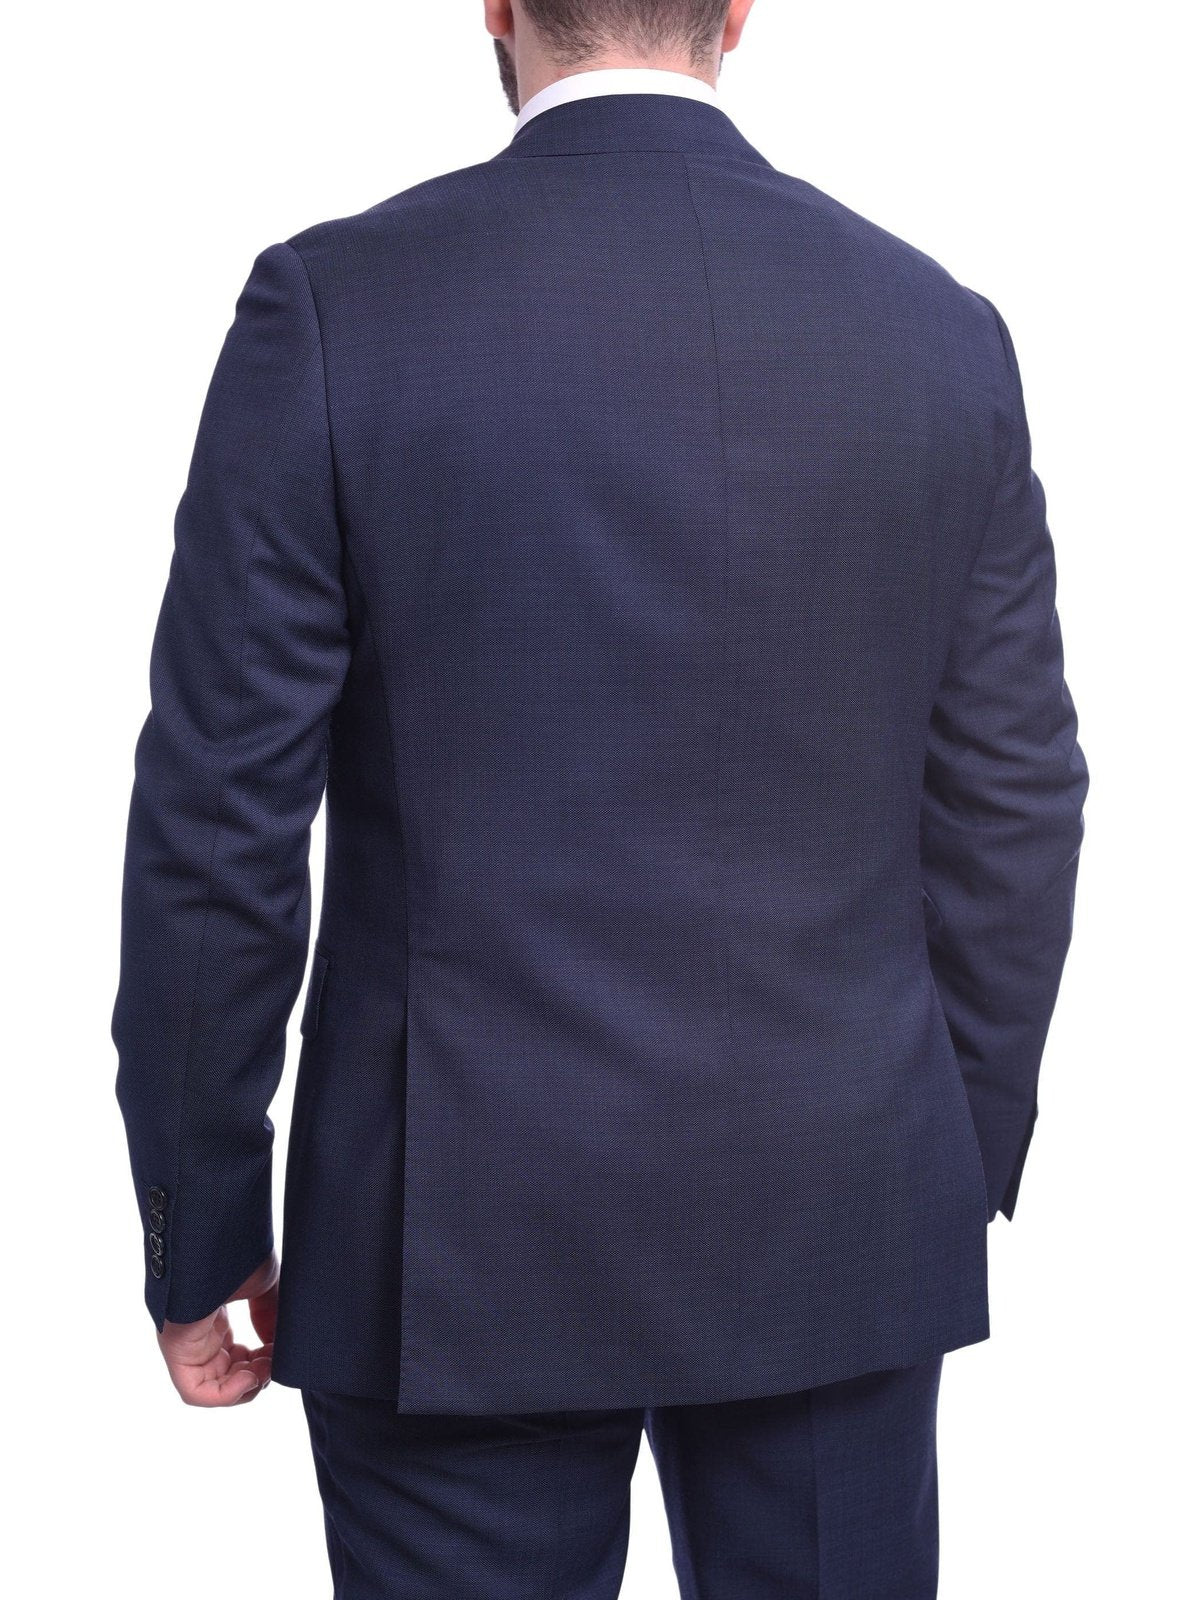 Napoli TWO PIECE SUITS Napoli Slim Fit Blue Textured Two Button Half Canvassed Wool Suit